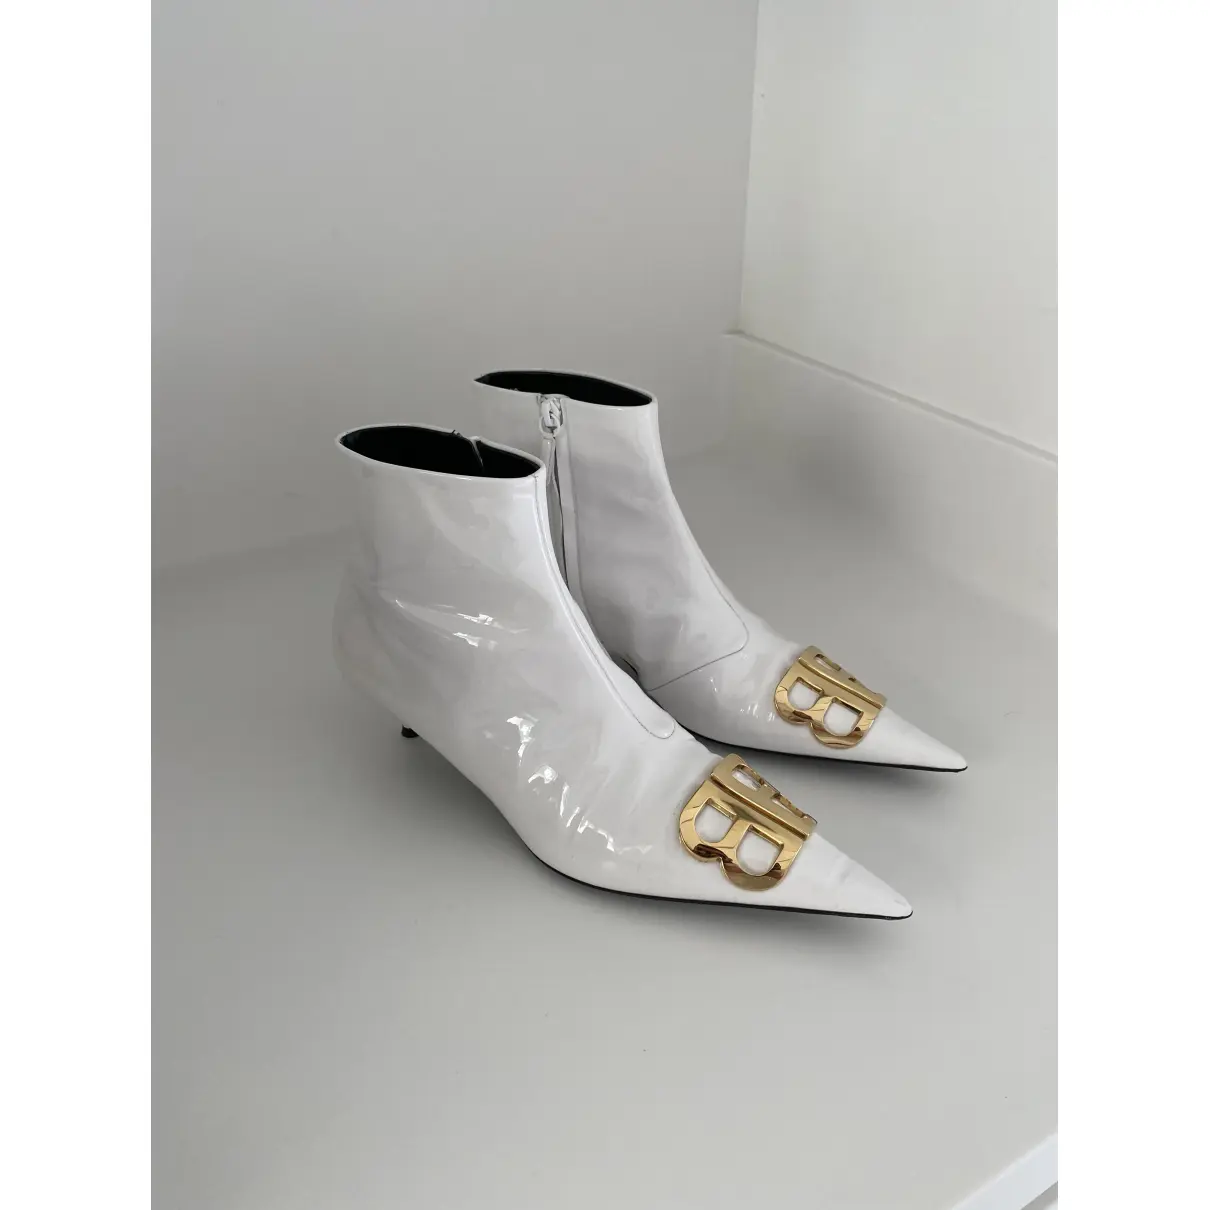 Buy Balenciaga Patent leather ankle boots online